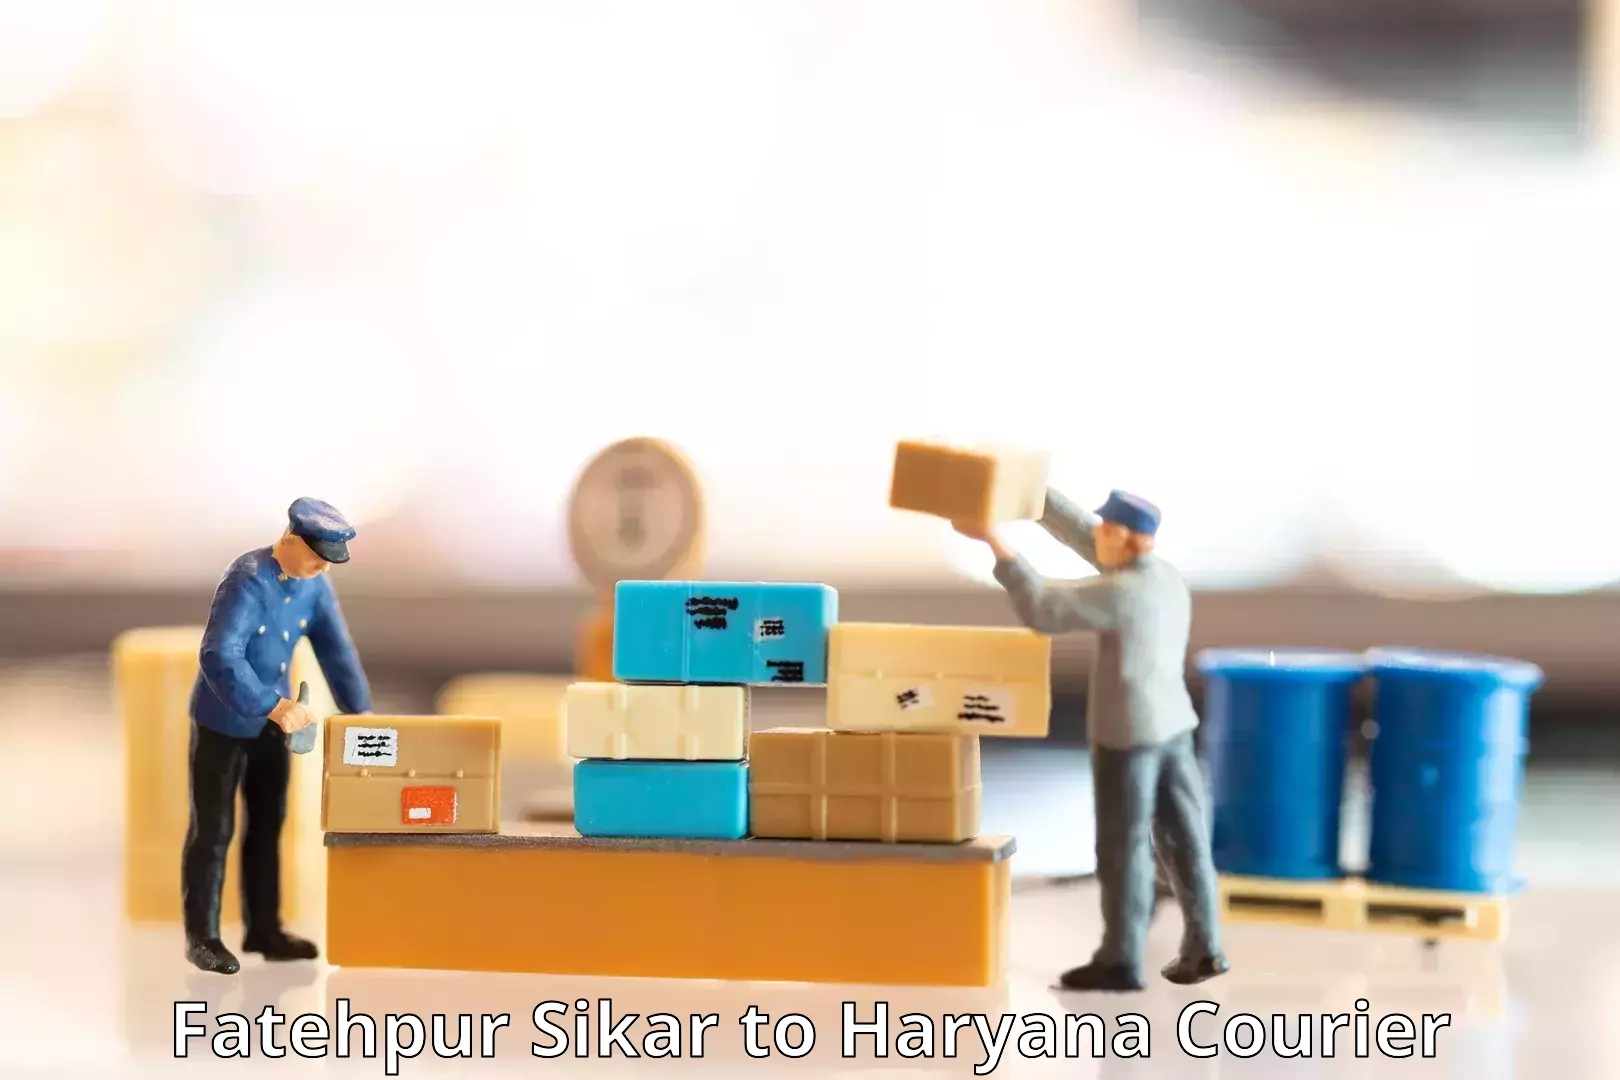 Courier service efficiency Fatehpur Sikar to Hisar